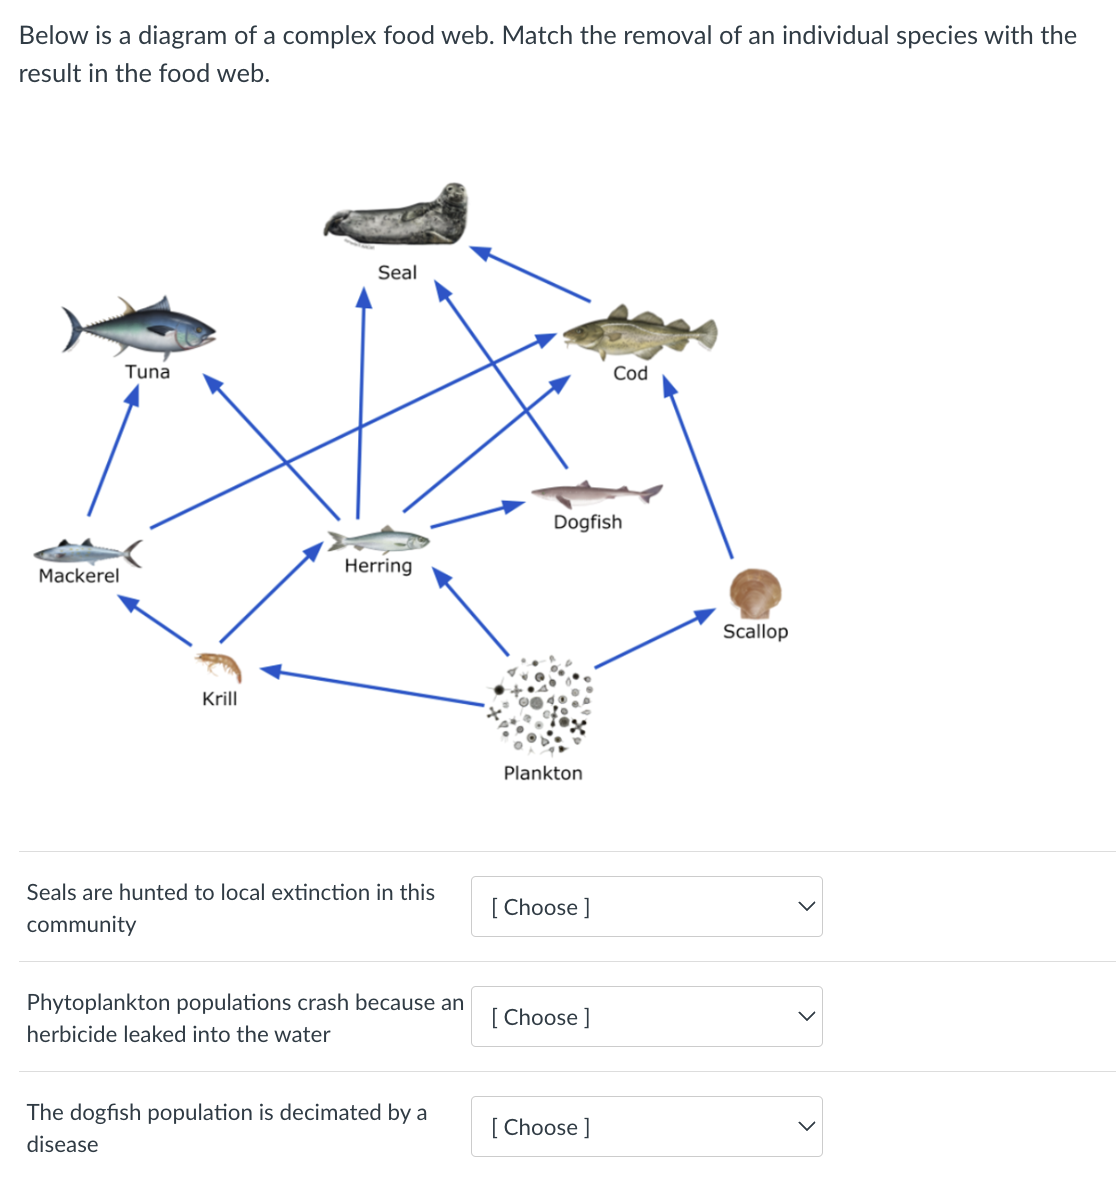 Below is a diagram of a complex food web. Match the removal of an individual species with the
result in the food web.
Mackerel
Tuna
Krill
Seal
Herring
Seals are hunted to local extinction in this
community
Phytoplankton populations crash because an
herbicide leaked into the water
The dogfish population is decimated by a
disease
Dogfish
Plankton
[Choose ]
[Choose ]
Cod
[Choose ]
Scallop
>
>